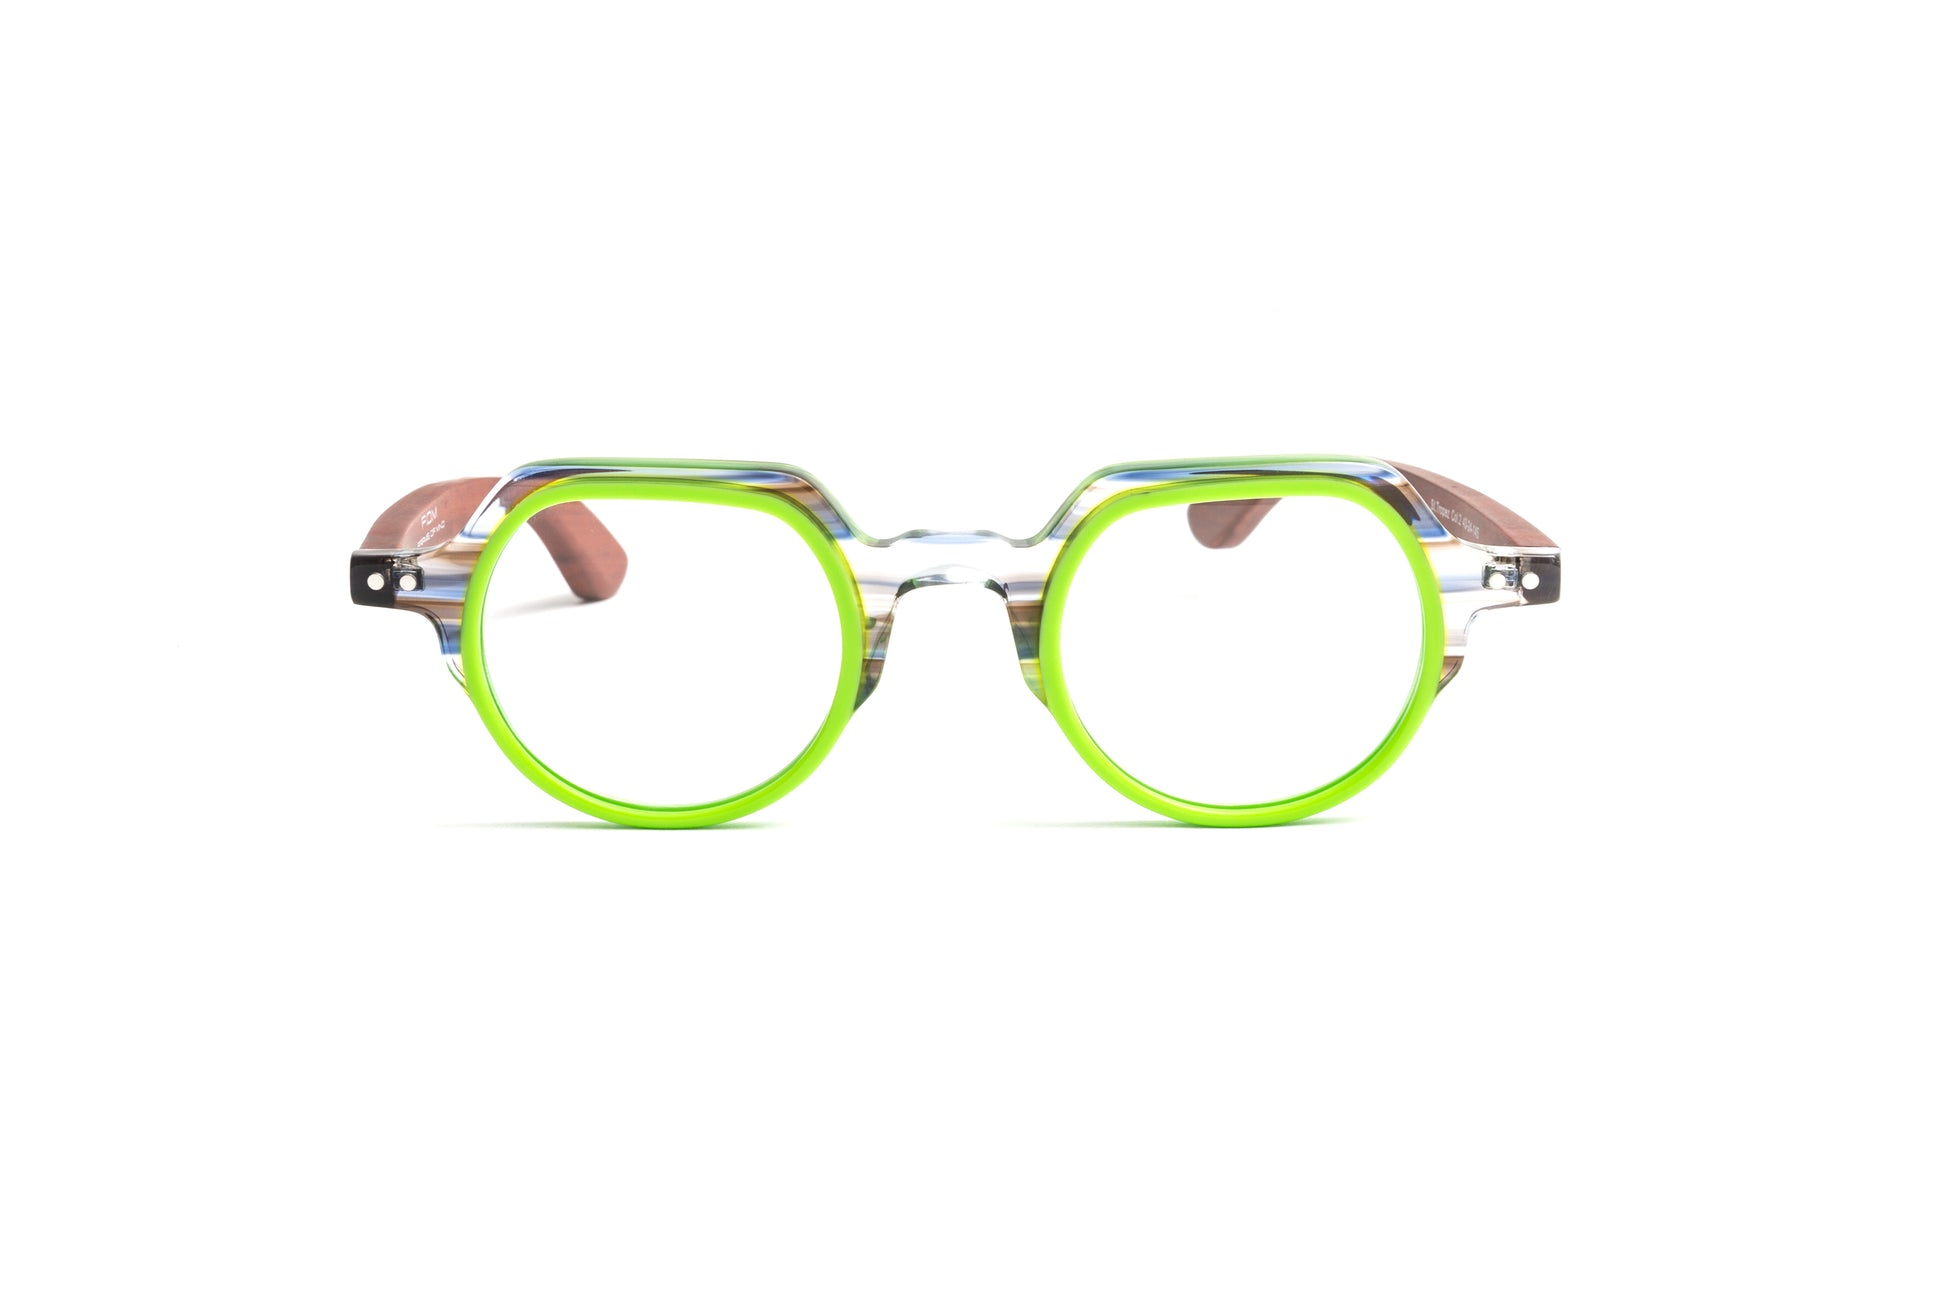 St. Tropez round unisex green and clear reading glasses with cherry wood temples by Eyejets